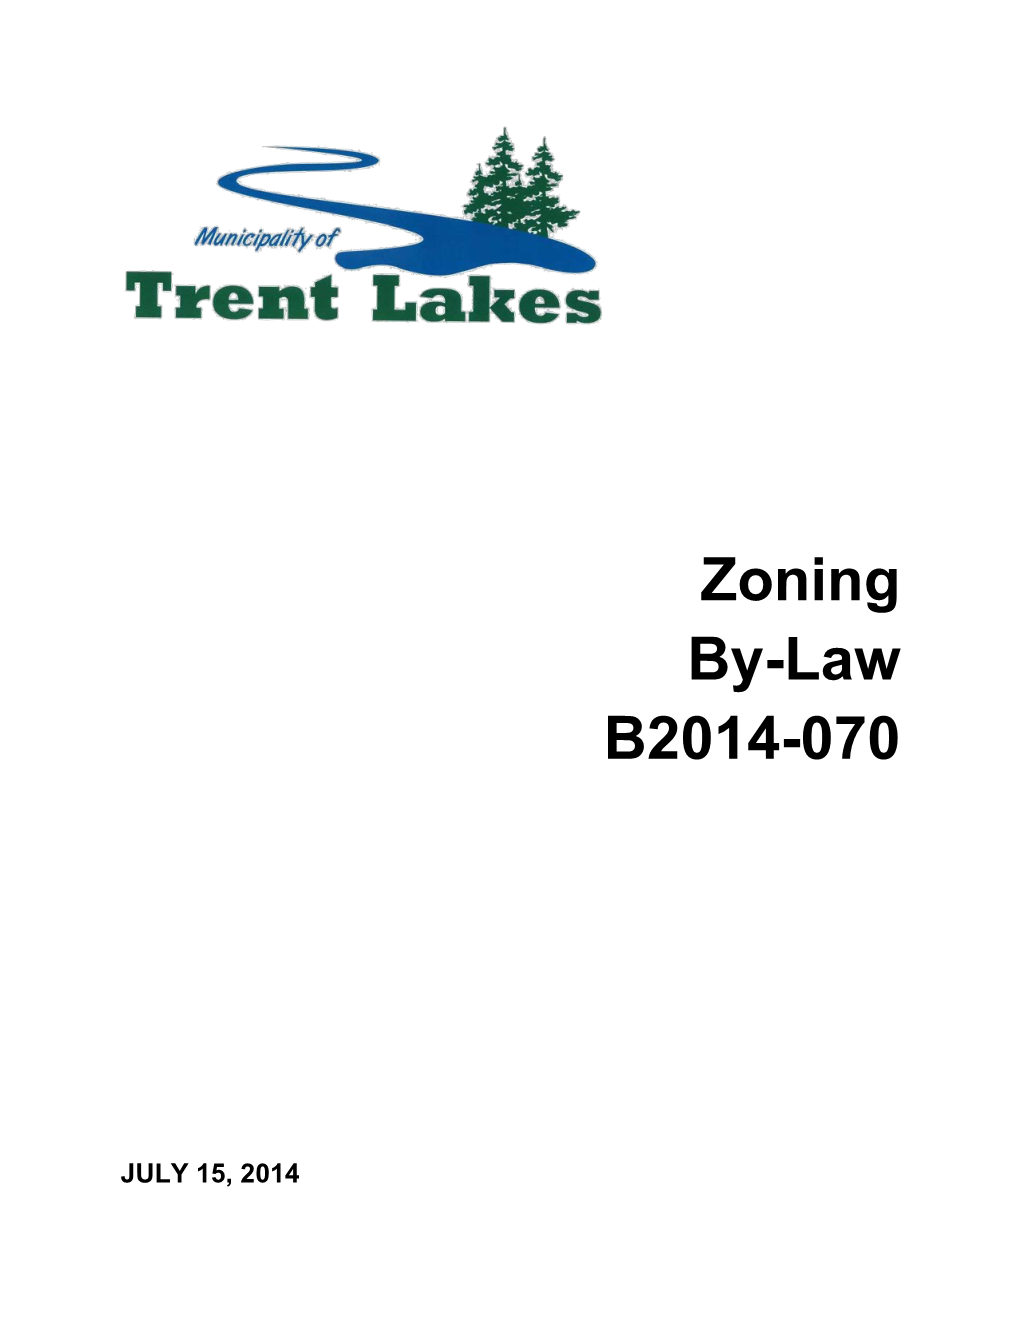 Zoning By-Law B2014-070